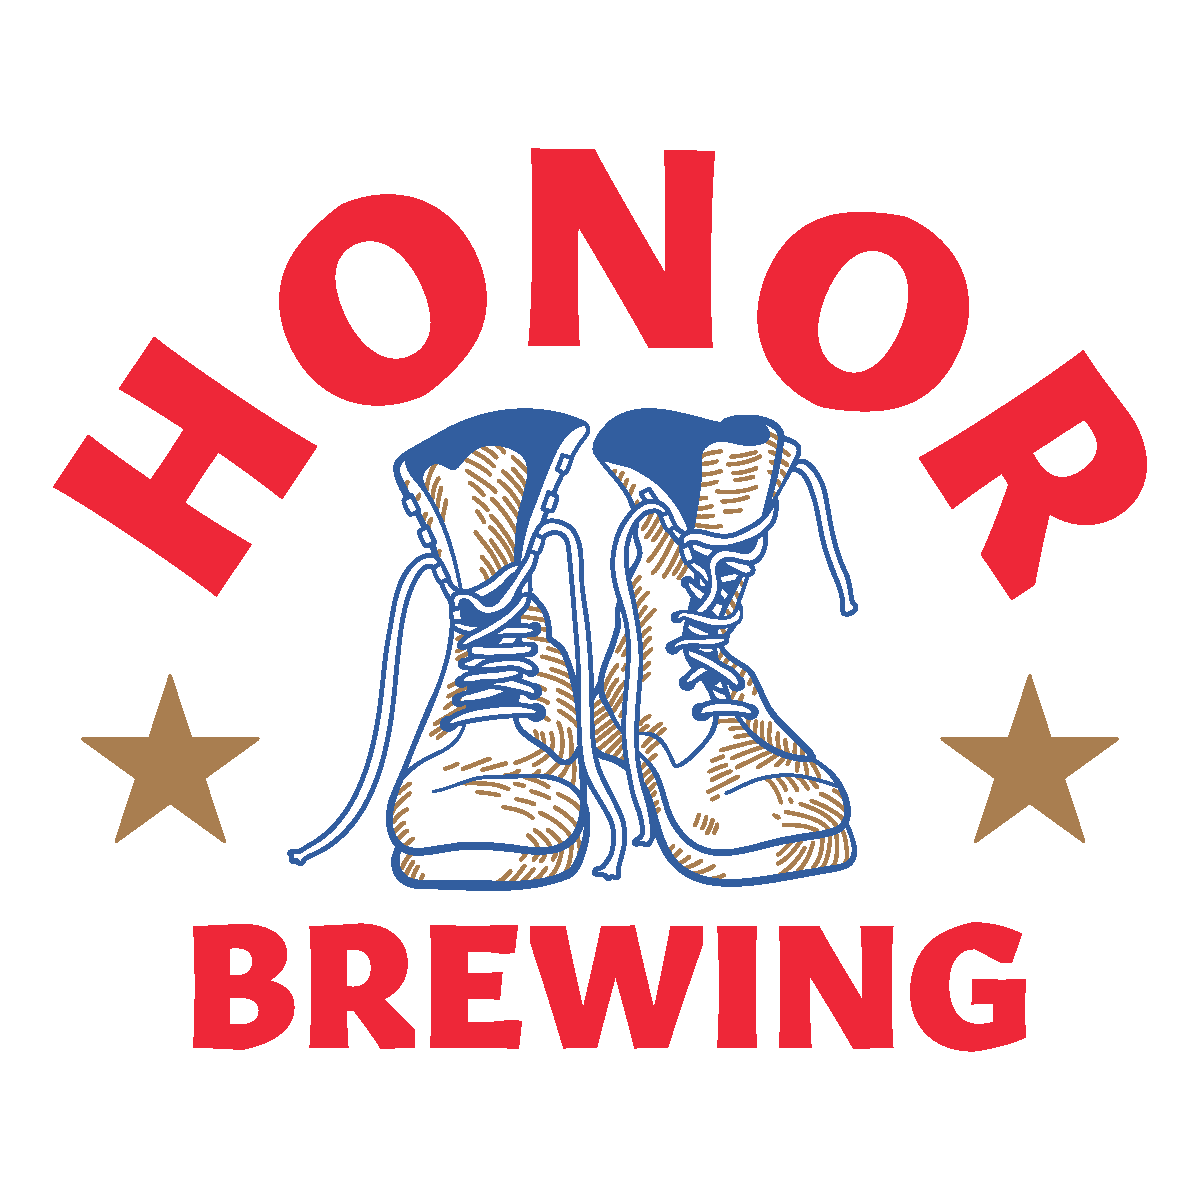 Honor Brewing Chantilly